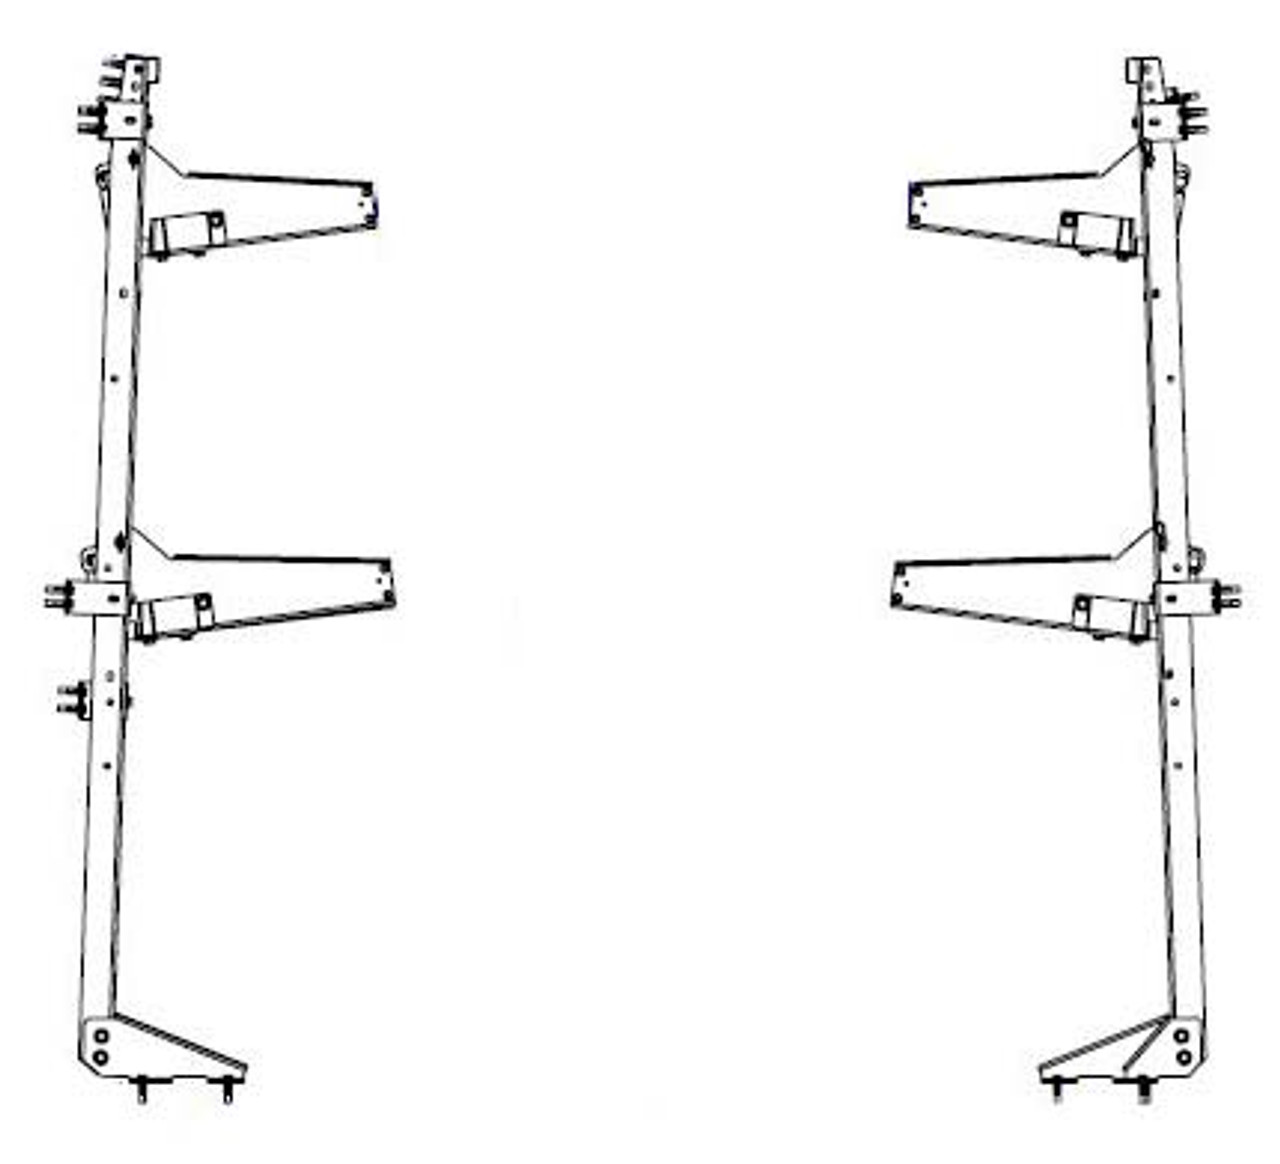 Ranger Fold-Up Shelving Pkg. Replacement For No. Q24005.19